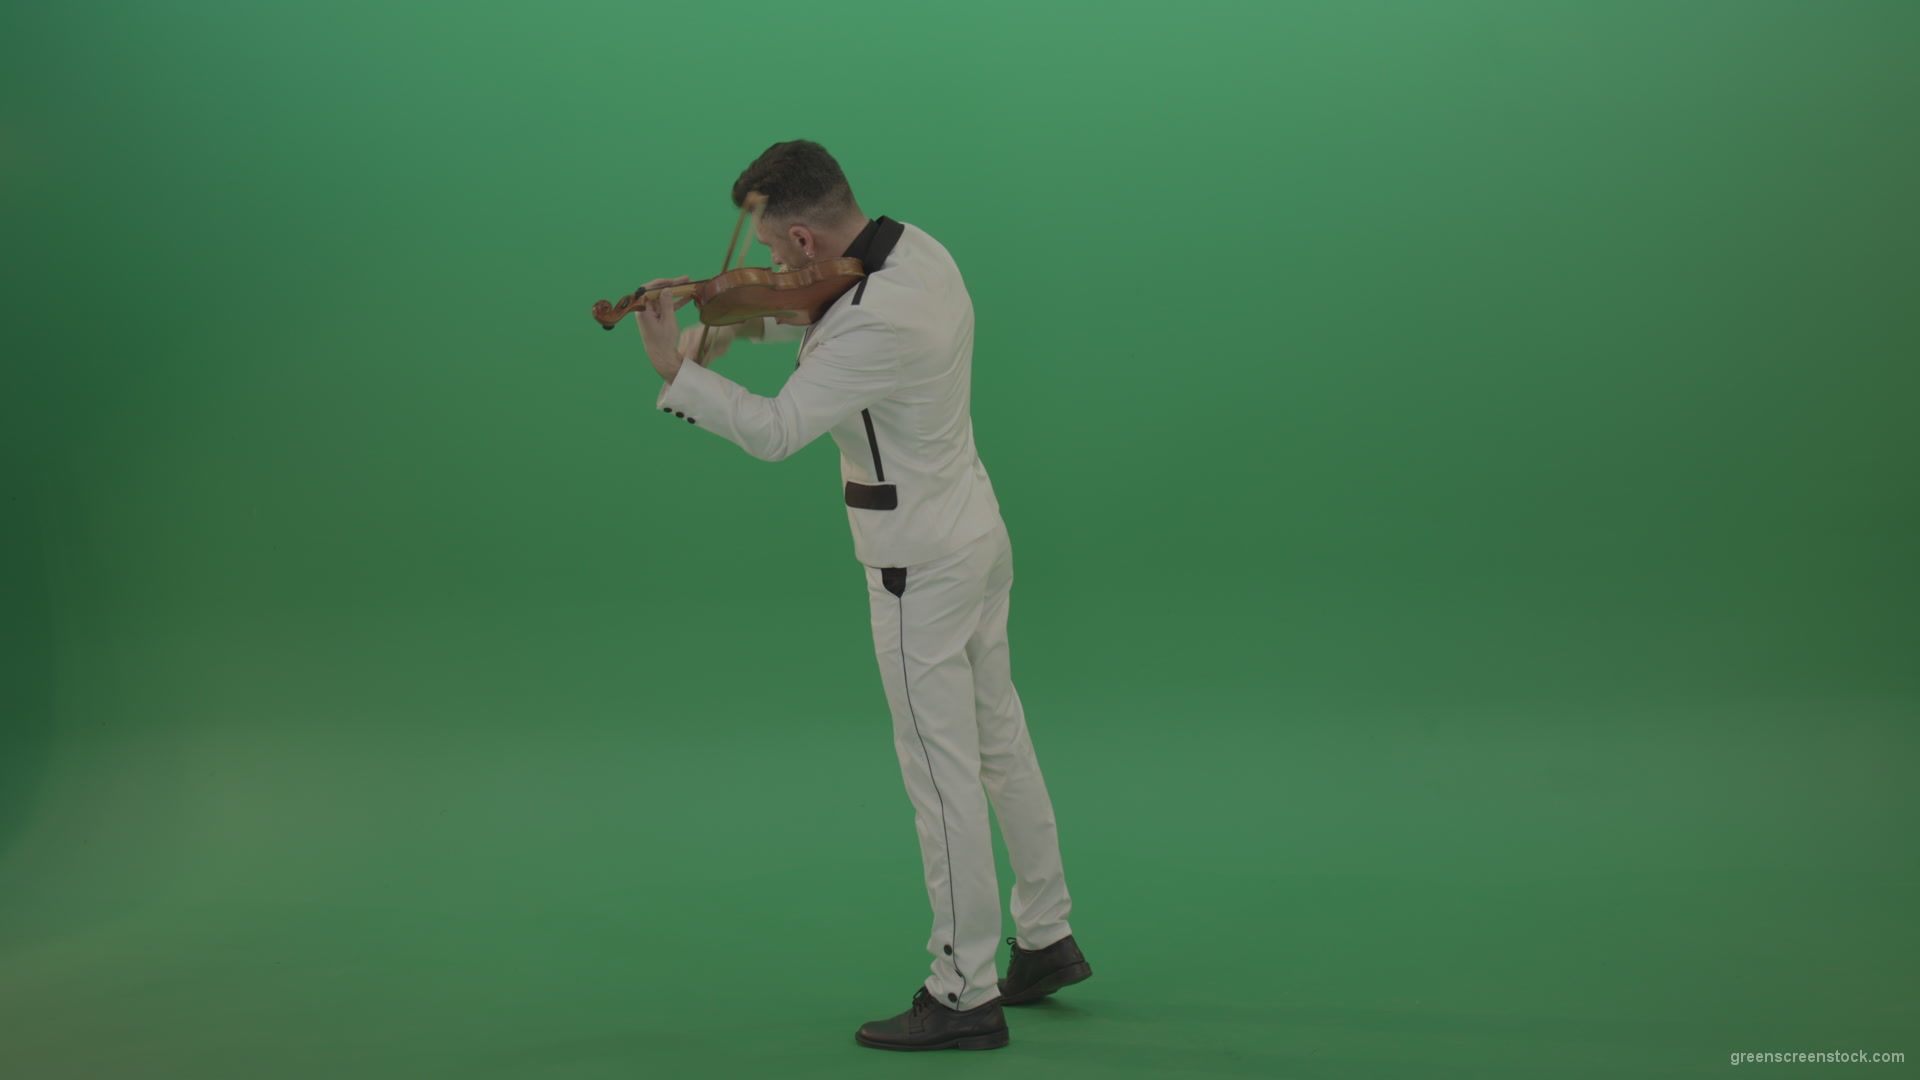 Full-size-Classic-orchestra-man-in-white-wear-play-violin-strings-music-instrument-isolated-on-green-screen-back-side-view_008 Green Screen Stock